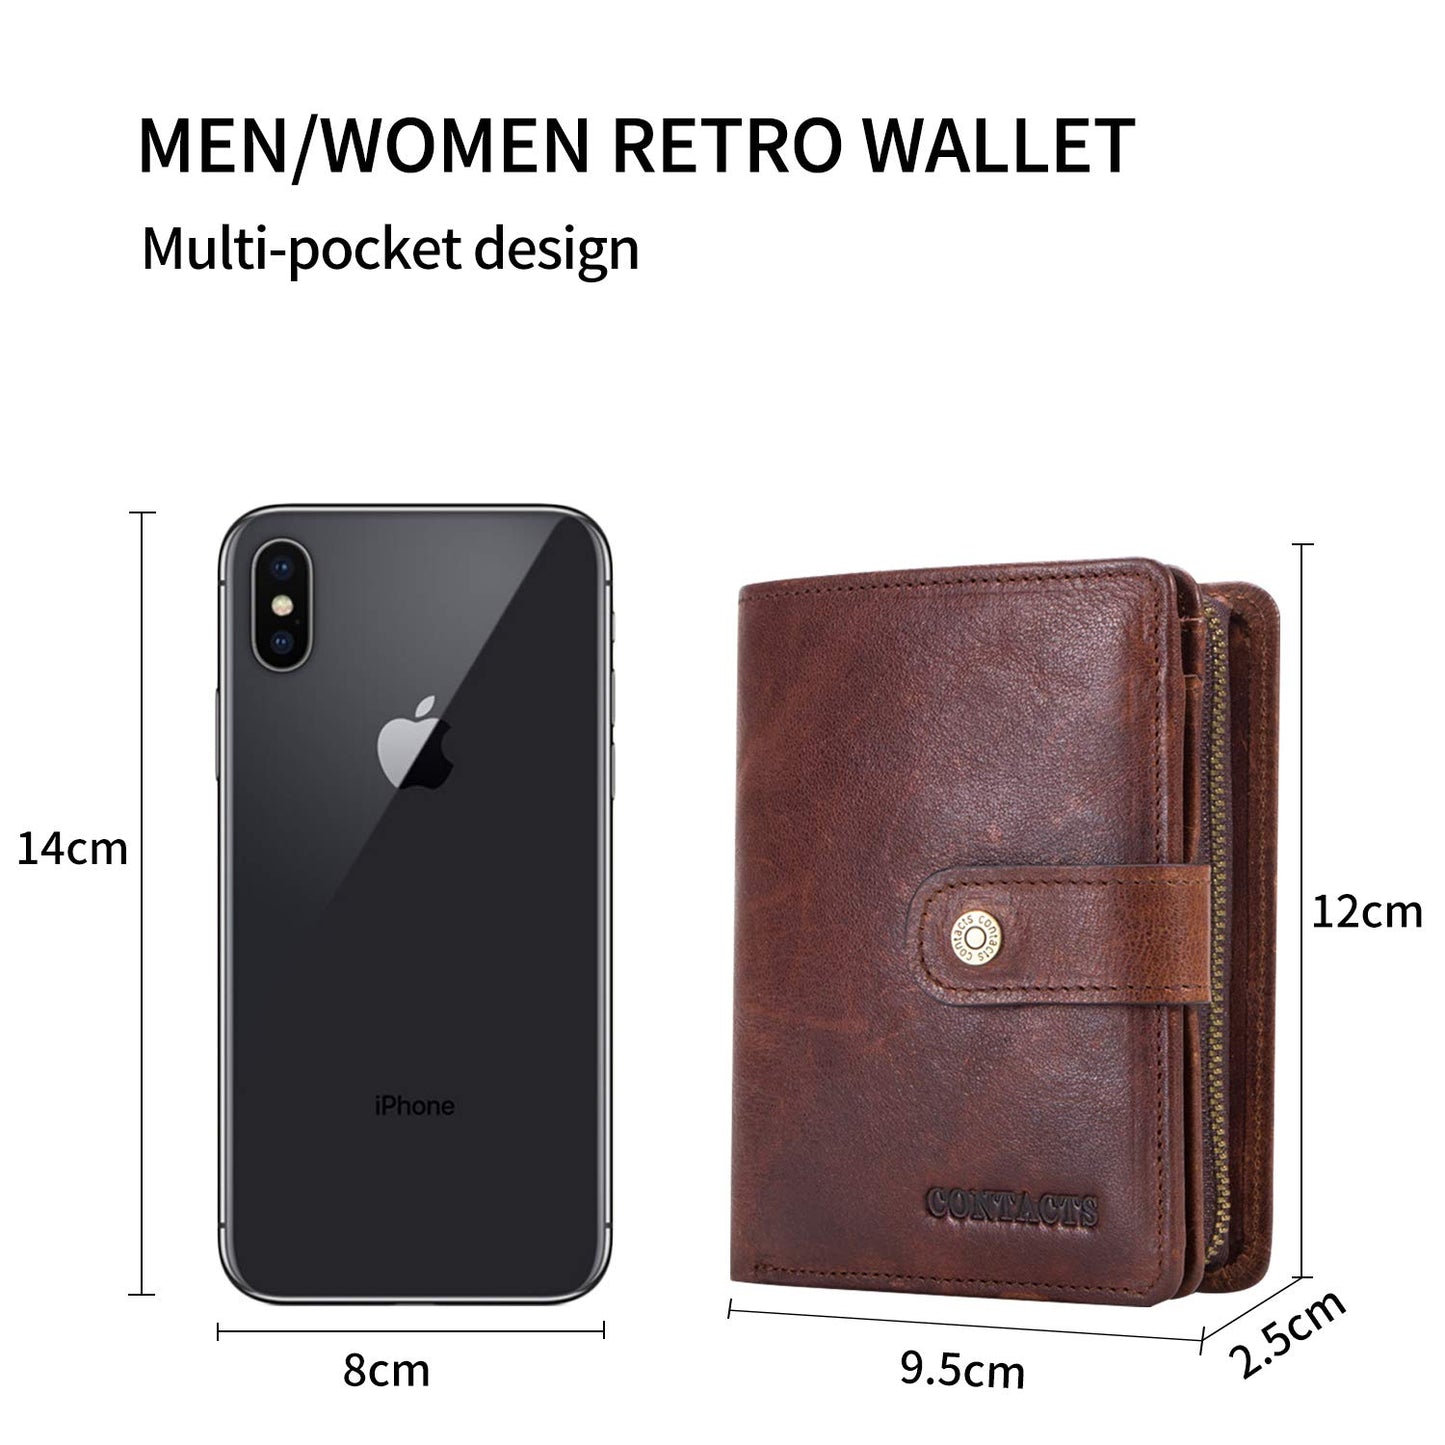 FANDARE Wallet with RFID Men Short Purse Leather Bifold Wallet with 12 * Credit Card Slots, 1 *Coin Pocket